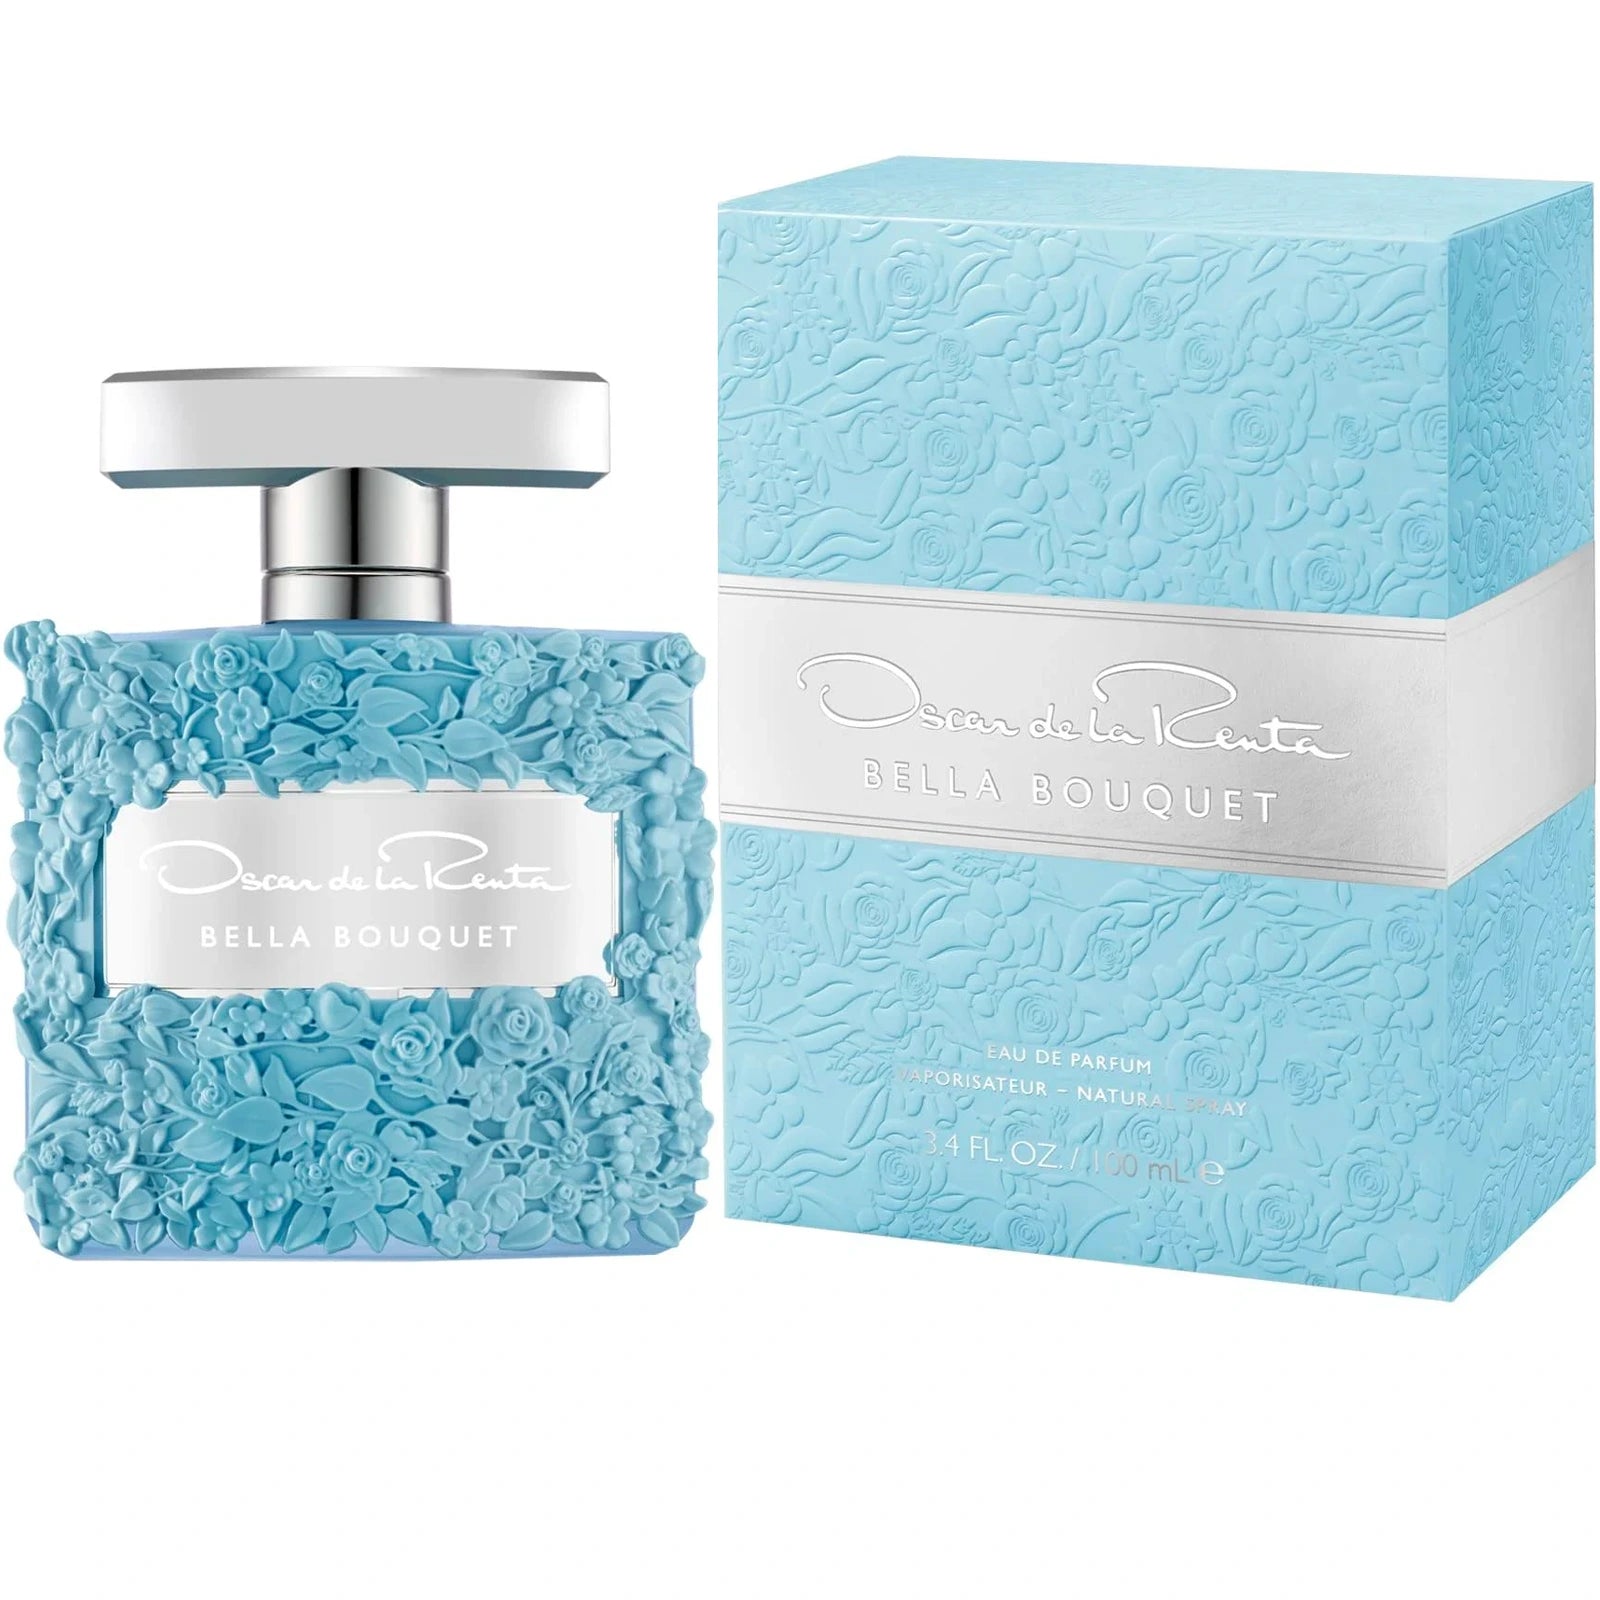 <p data-mce-fragment="1">Bella Bouquet EDP is a sophisticated fragrance inspired by a vibrant and lush garden. It features an uplifting blend of crisp bamboo leaves, green pear, sparkling clementine, and juicy peach. Feminine, floral heart notes of magnolia, rose, jasmine sambac, and iris give it volume, while sensual cedarwood, sandalwood, and tonka bean are wrapped gracefully in soft musk. Romantic and luxurious, Bella Bouquet is an irresistible scent.</p>
<strong data-mce-fragment="1">Fragrance Family:</strong><span data-mce-fragment="1"> Floral</span><br>